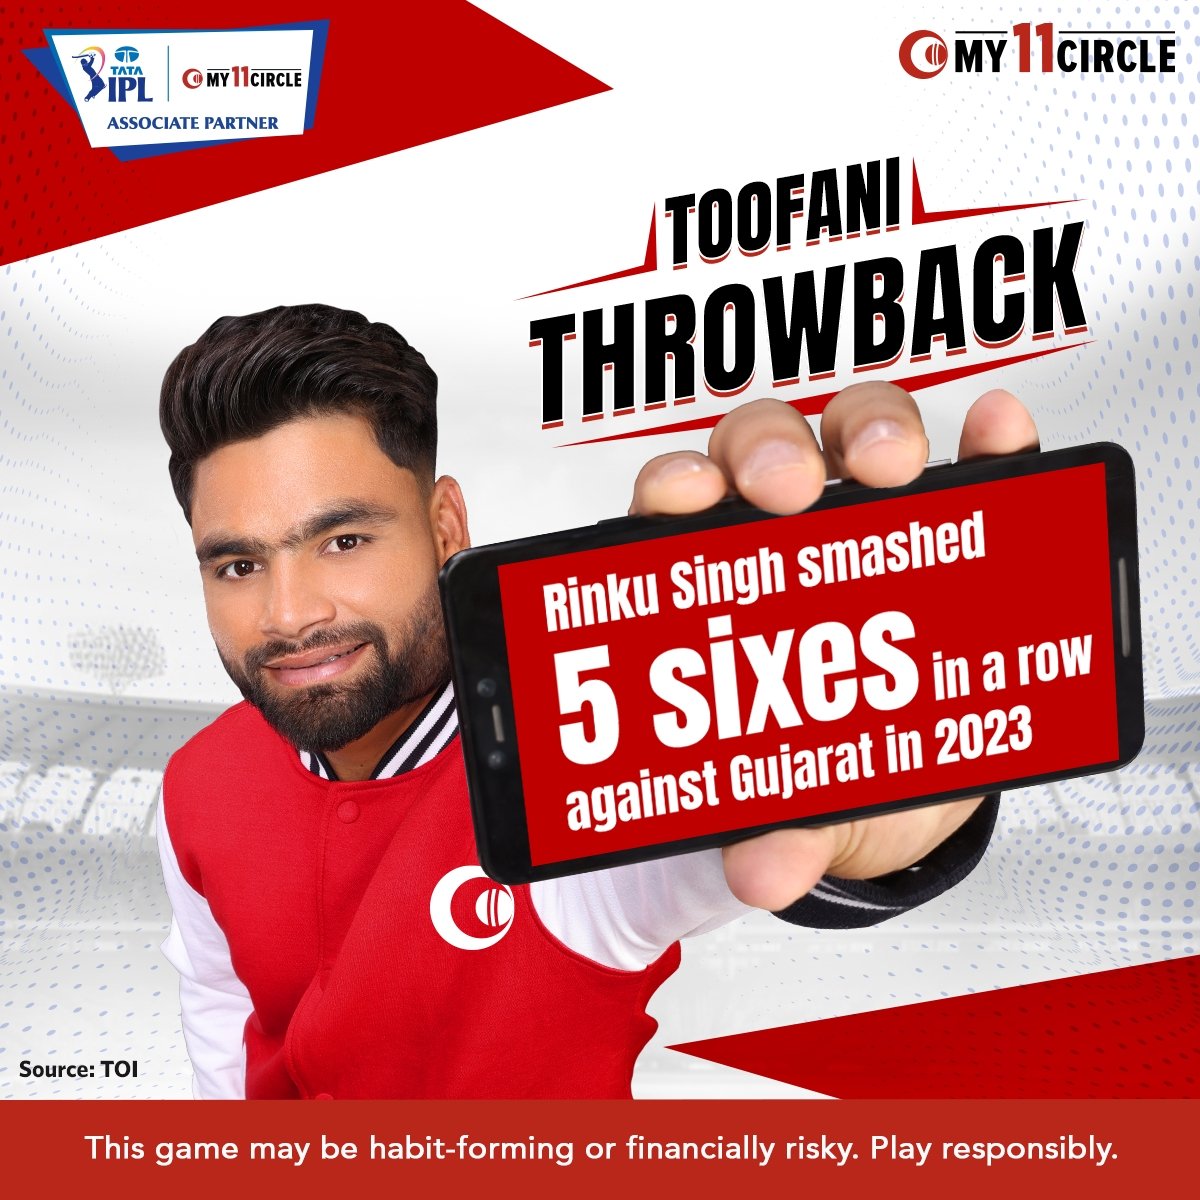 Do you remember this last-ball thriller match? 🤔 Comment below. #My11Circle #RinkuSingh #Throwback #Cricket